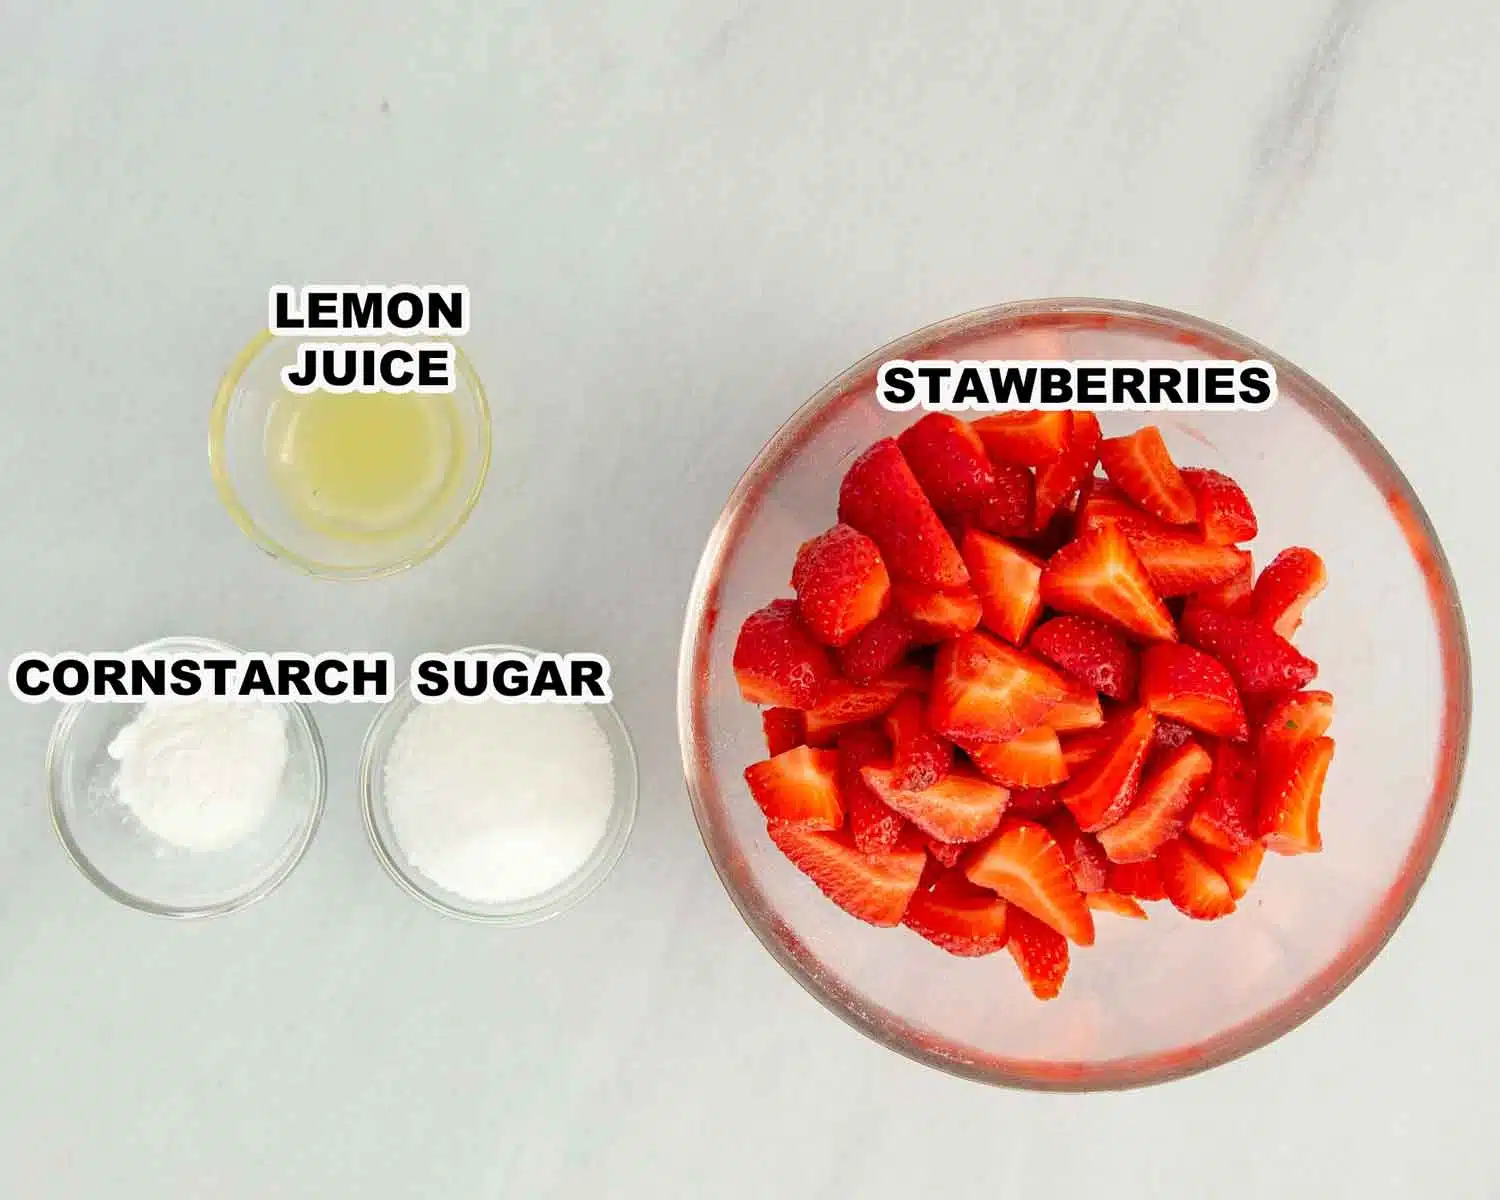 ingredients needed to make strawberry oatmeal bars.